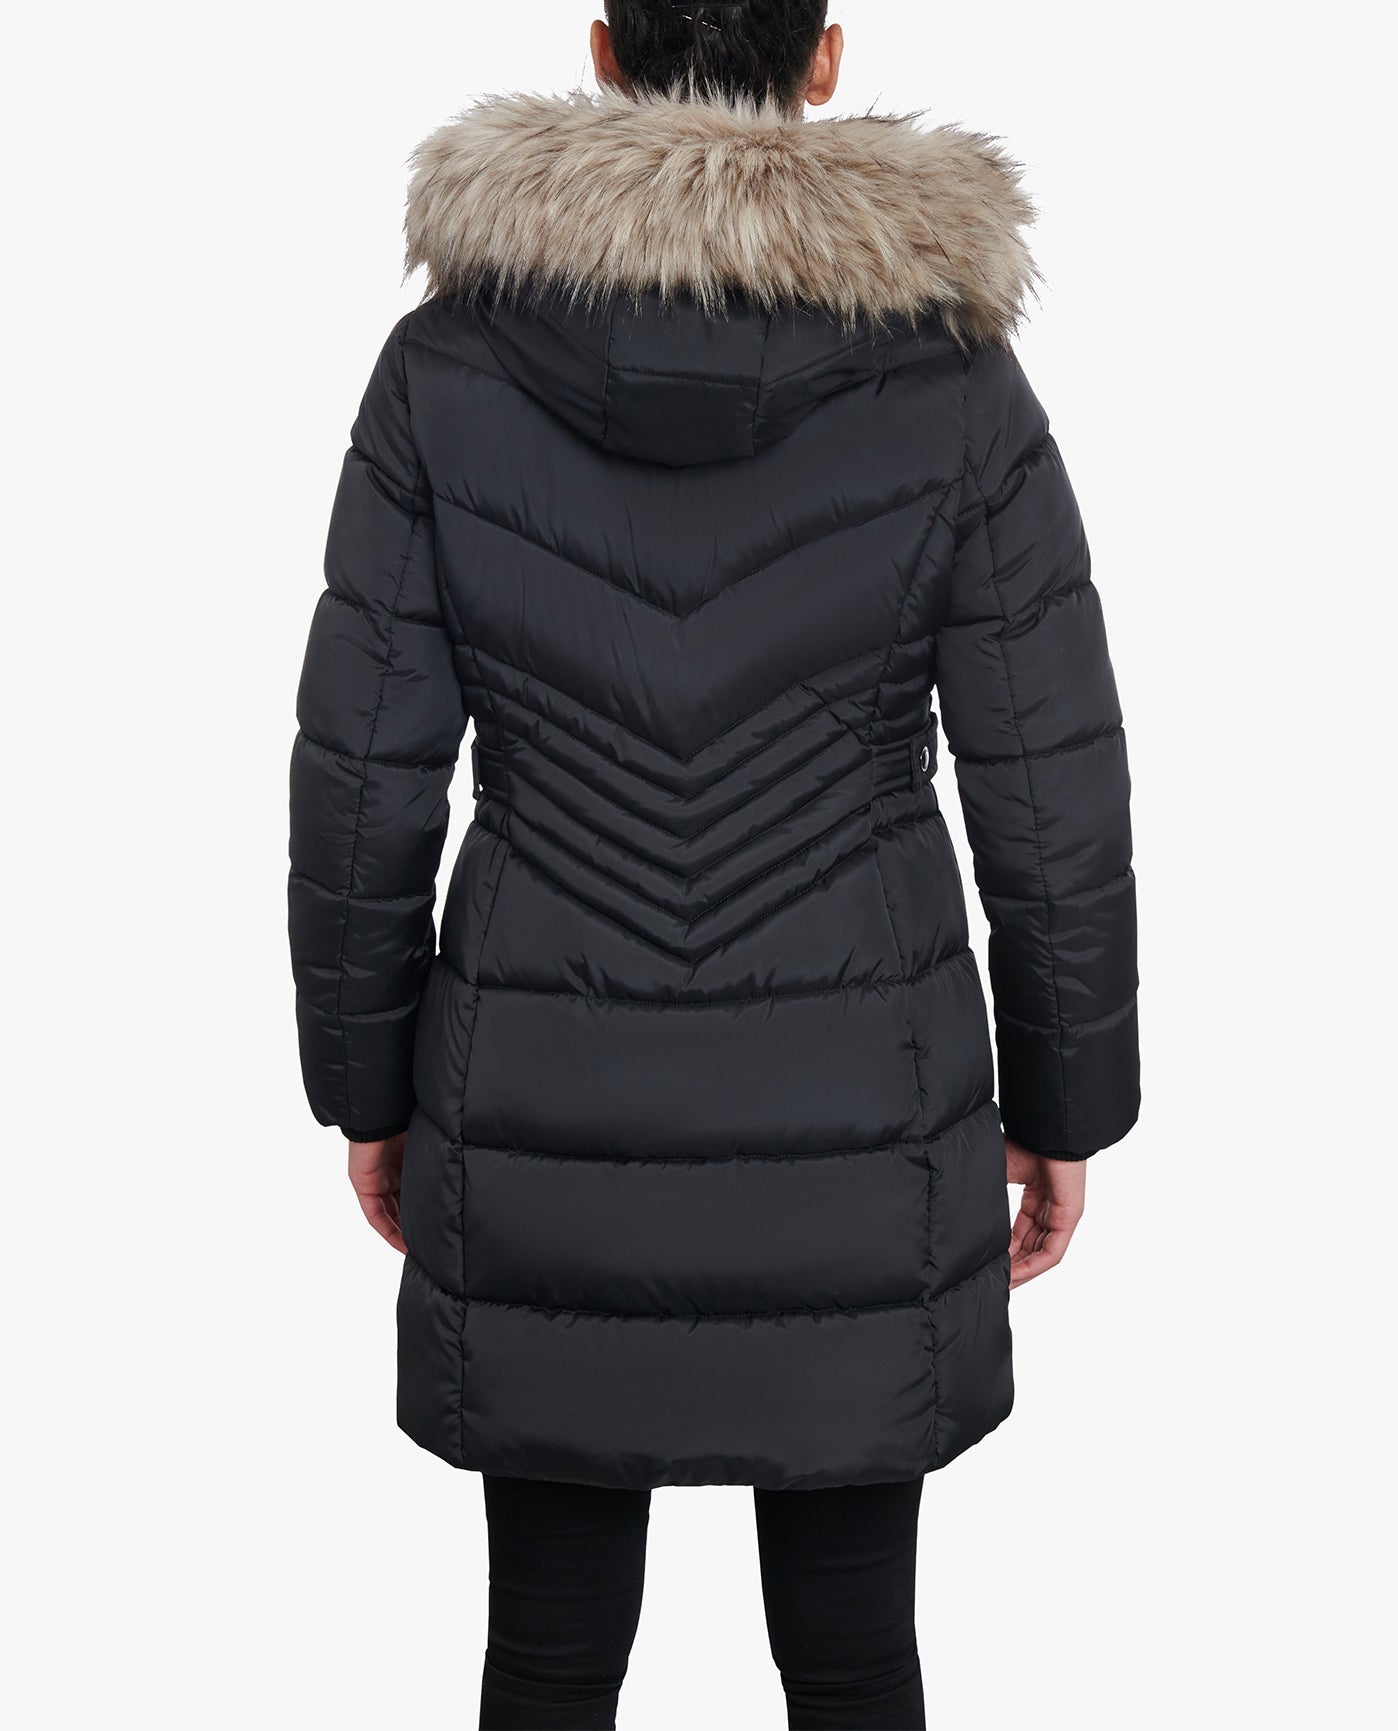 BACK VIEW OF PLUS SIZE ZIP-FRONT LONG LENGTH PUFFER JACKET WITH ZIP-OFF FUR TRIM HOOD | BLACK